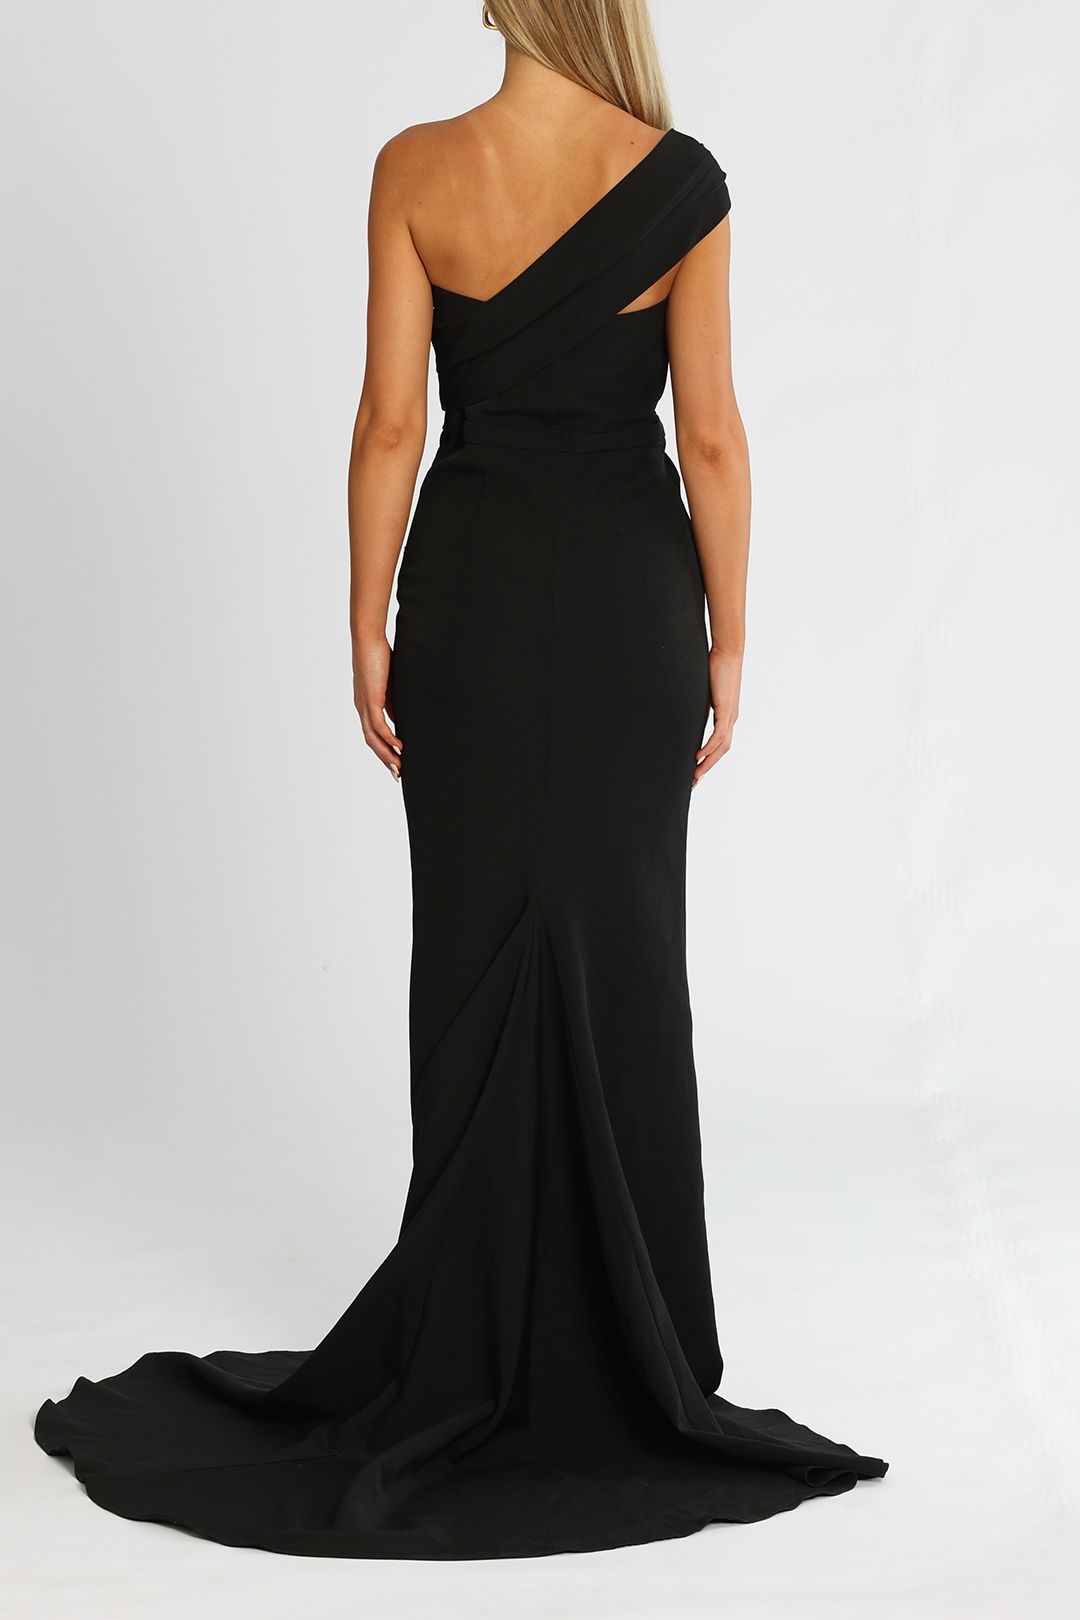 Elle Zeitoune One Sided Off The Shoulder Detail Gown Black Asymmetrical